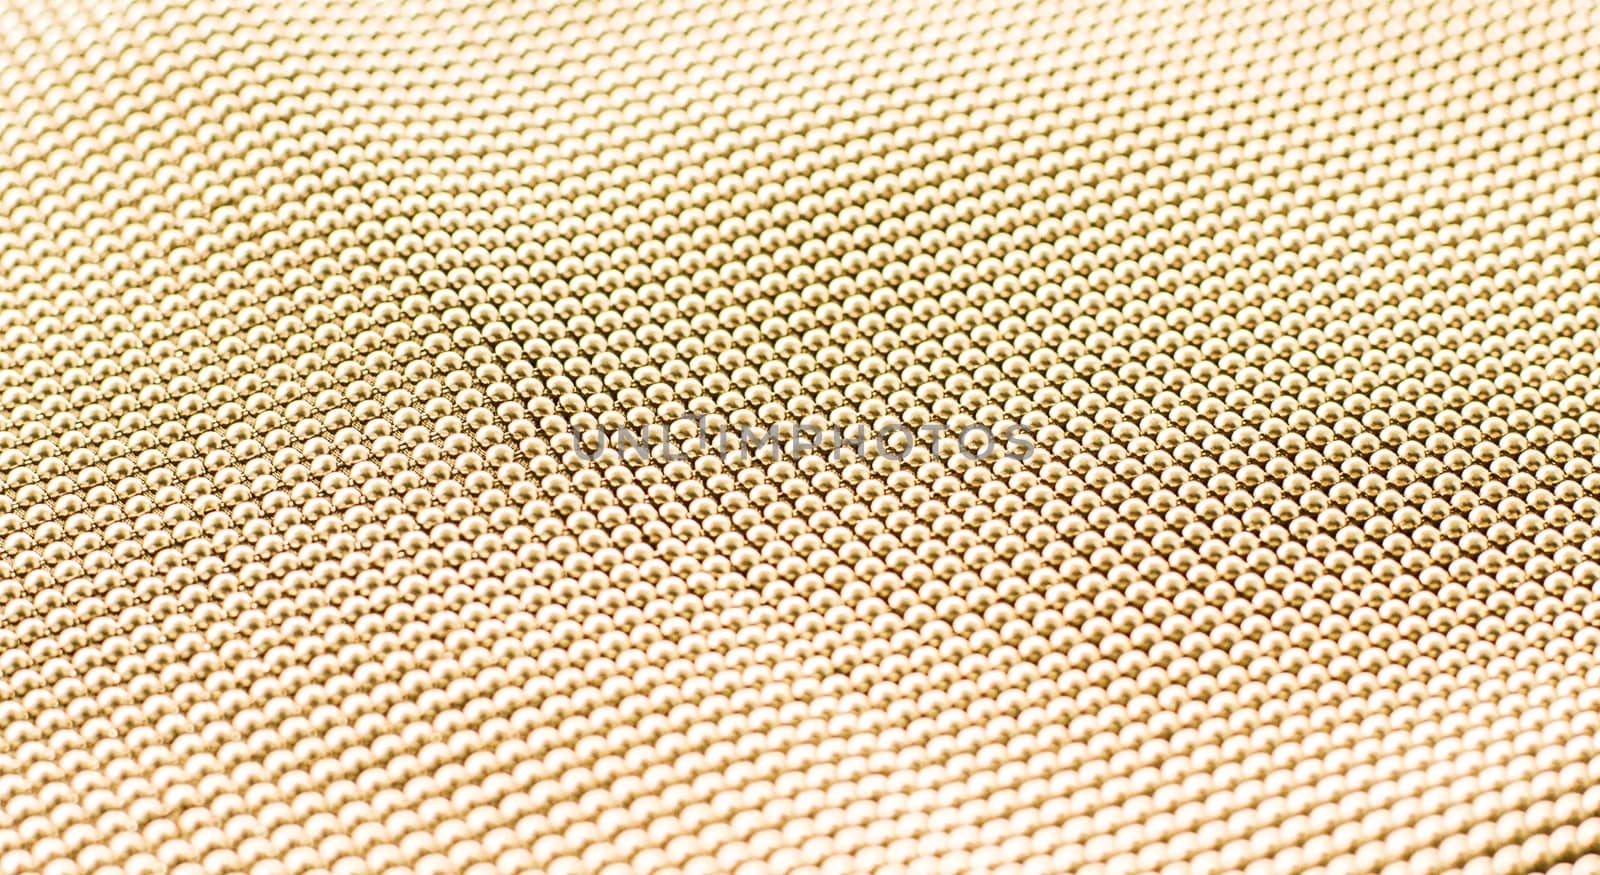 Golden metallic abstract background, futuristic surface and high tech materials